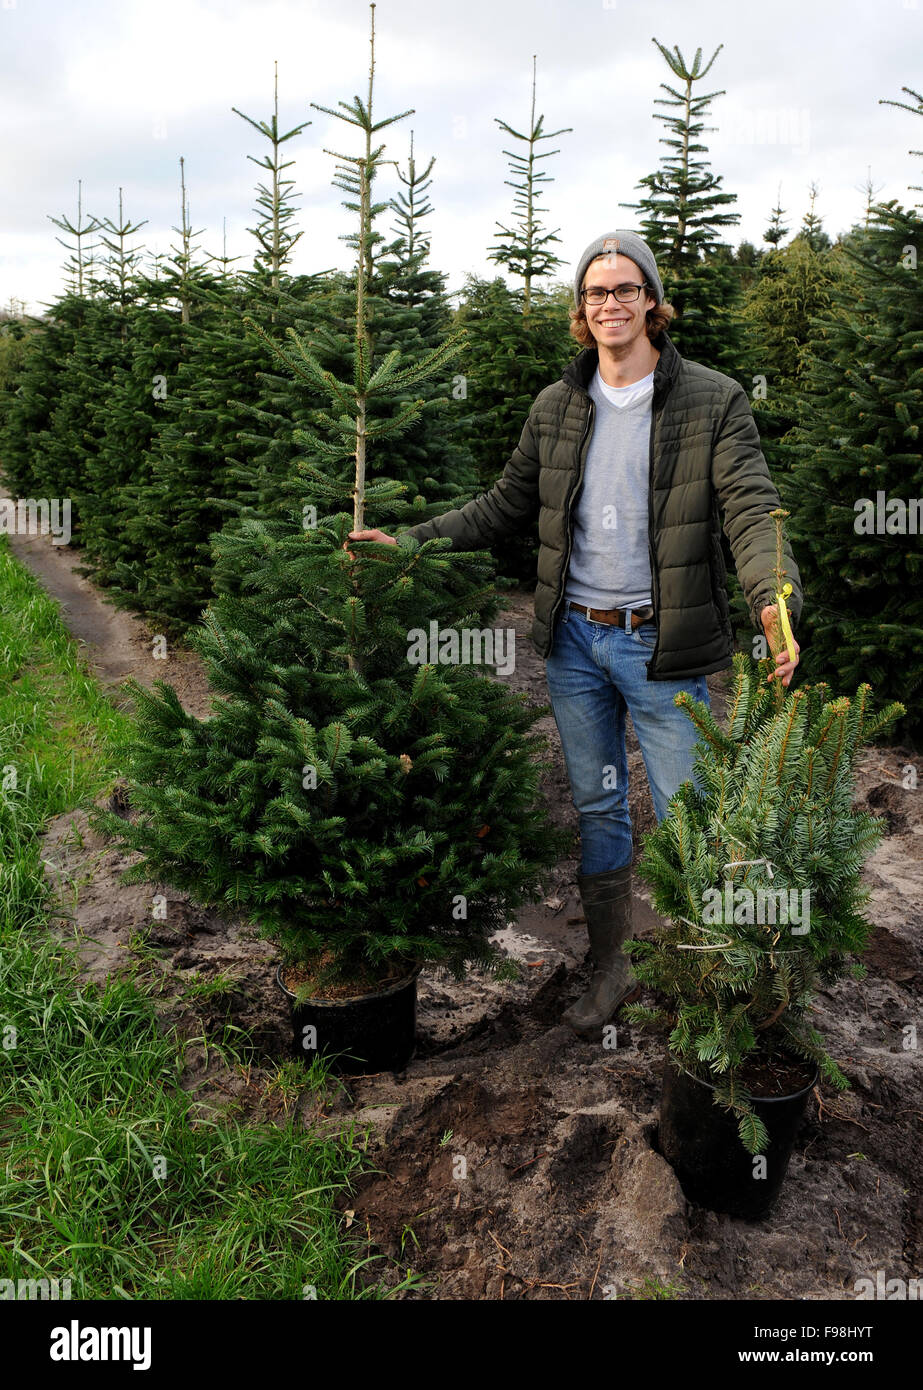 Rastede, Germany. 04th Dec, 2015. Kersten Scholz of the Scholz tree nursery poses next to a potted Christmas tree in Rastede, Germany, 04 December 2015. The tree nursery rents out the potted trees. After the holiday season the trees are collected and replanted to make the Christmas tree business more sustainable. Photo: Ingo Wagner/dpa/Alamy Live News Stock Photo